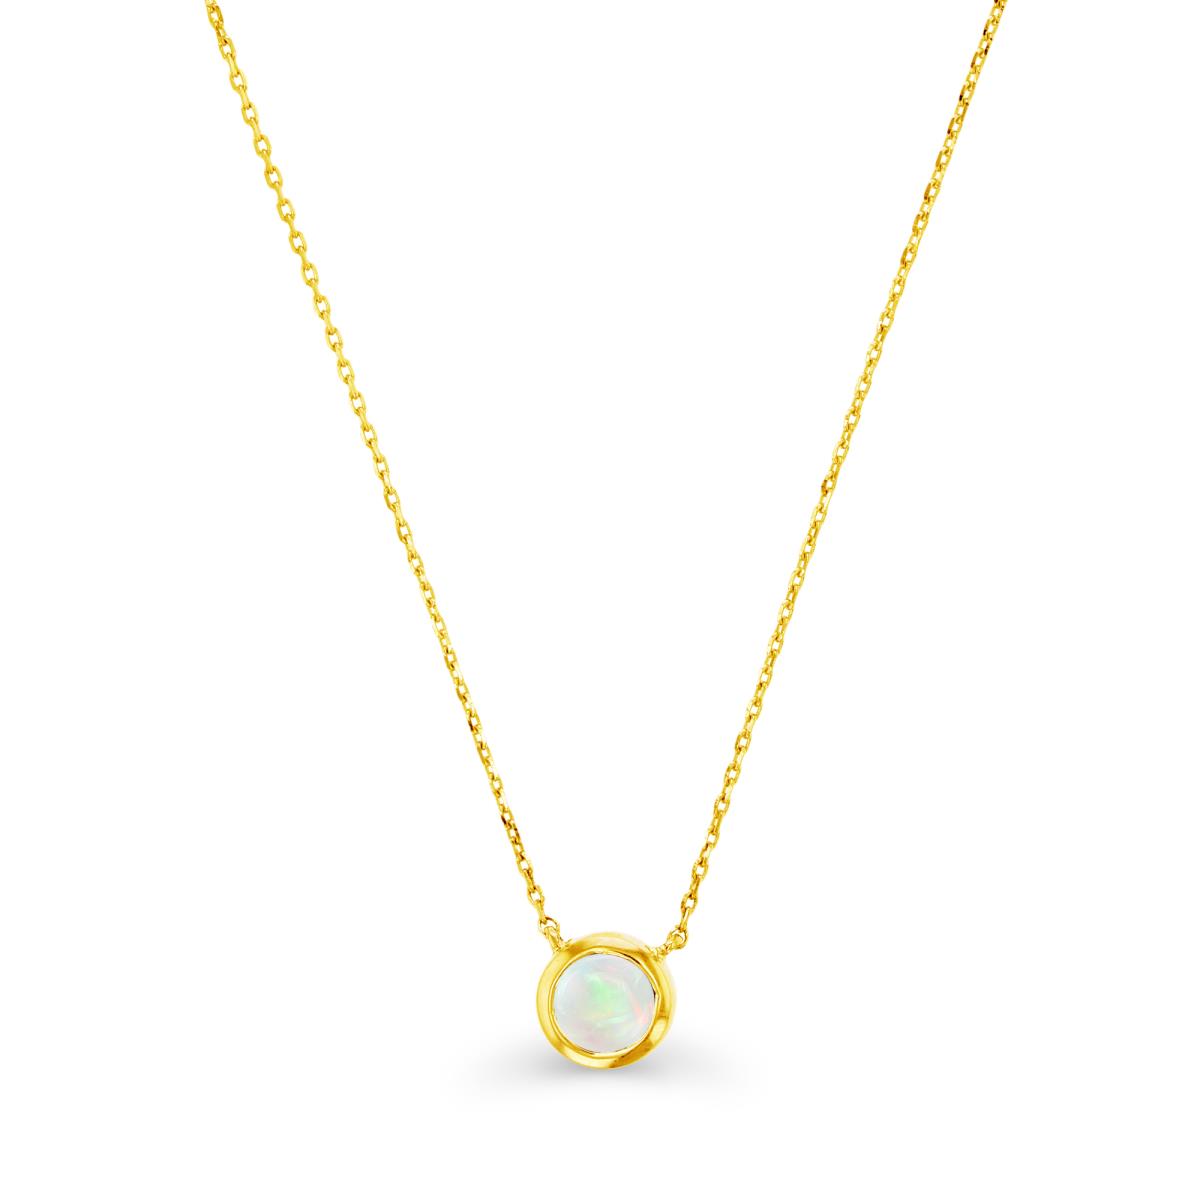 10K Yellow Gold & 5mm Rd Opal Set Necklace